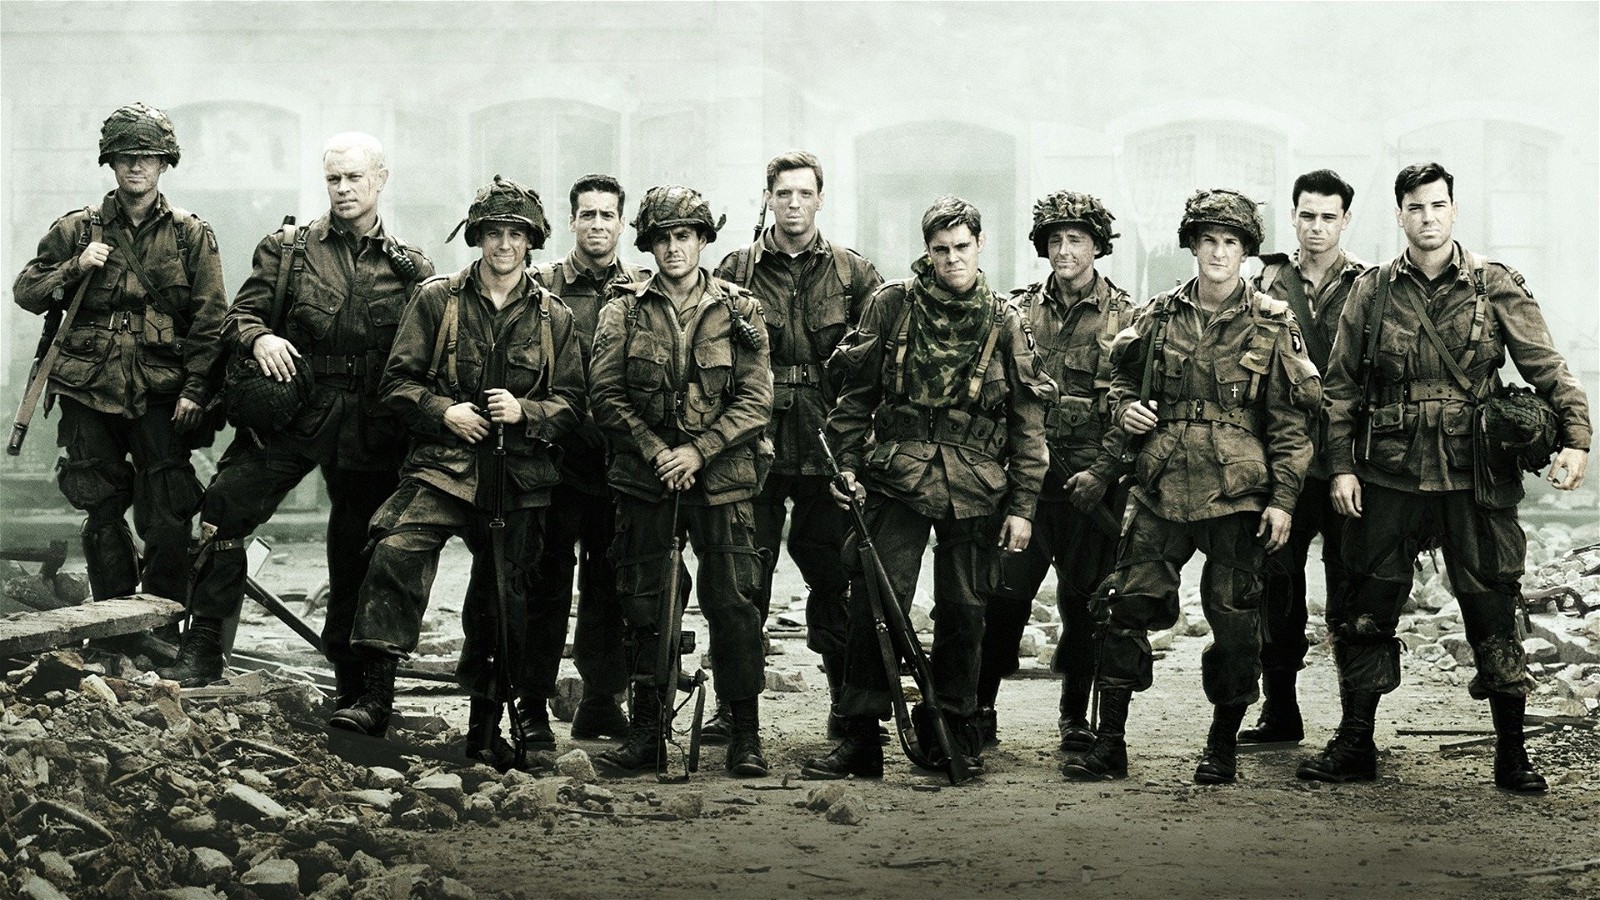 HBO's Band of Brothers was a definitive WW2-themed masterpiece